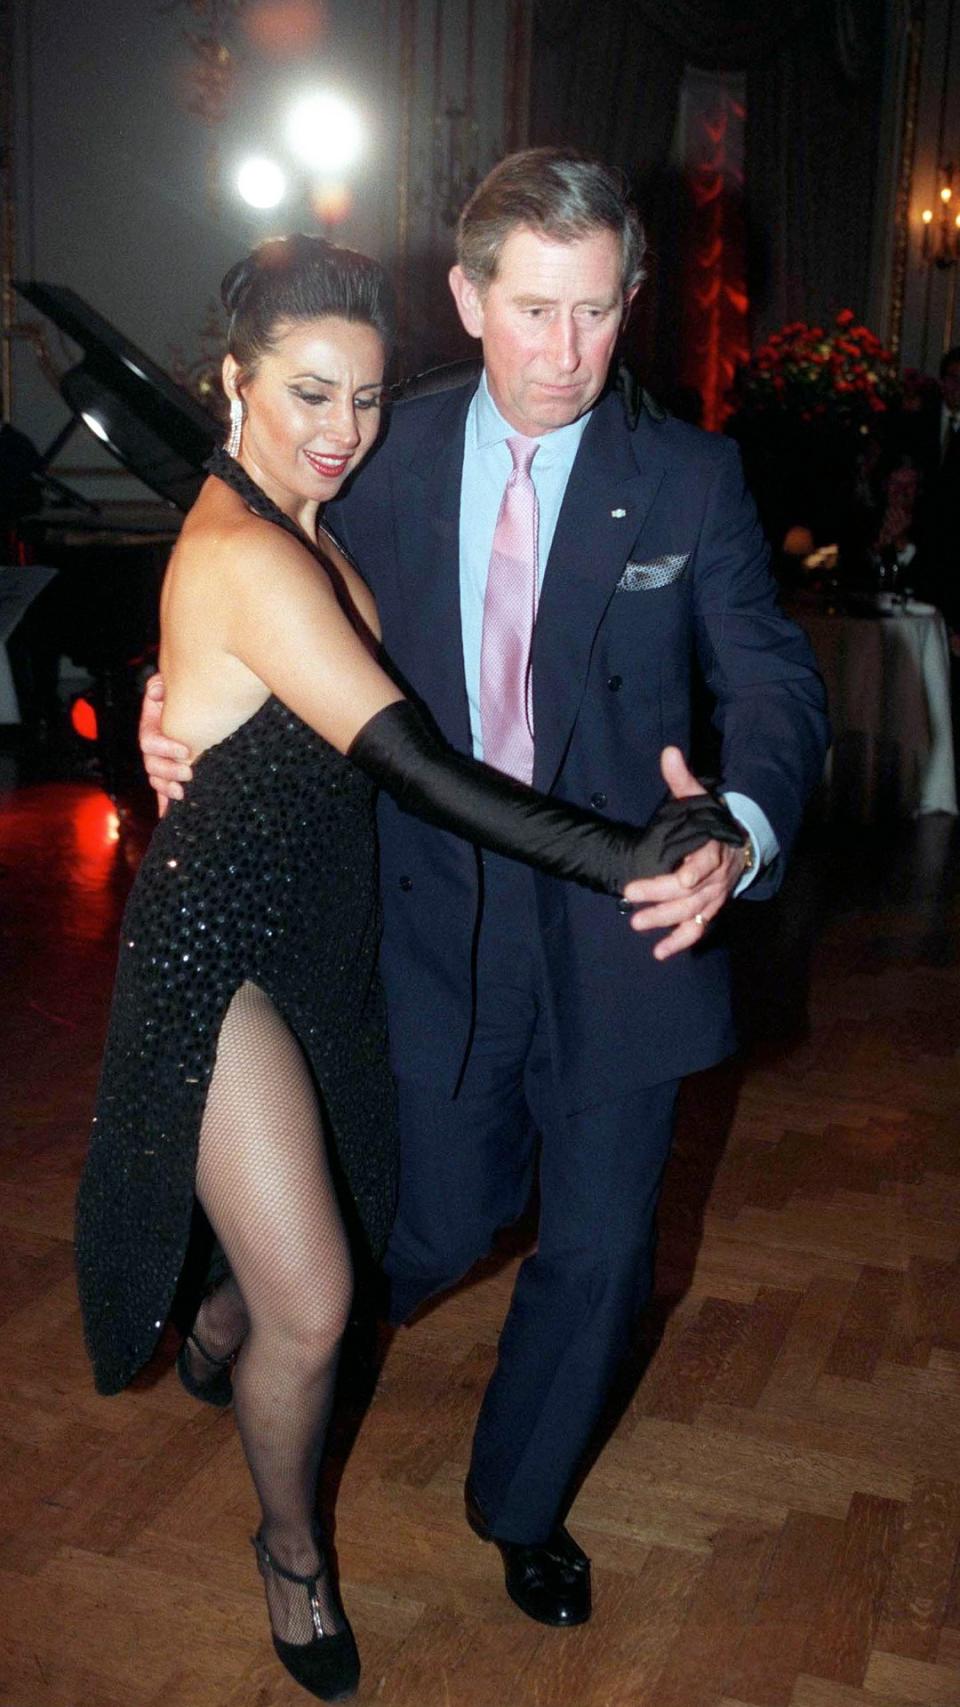 Prince Charles dances up a storm in Argentina